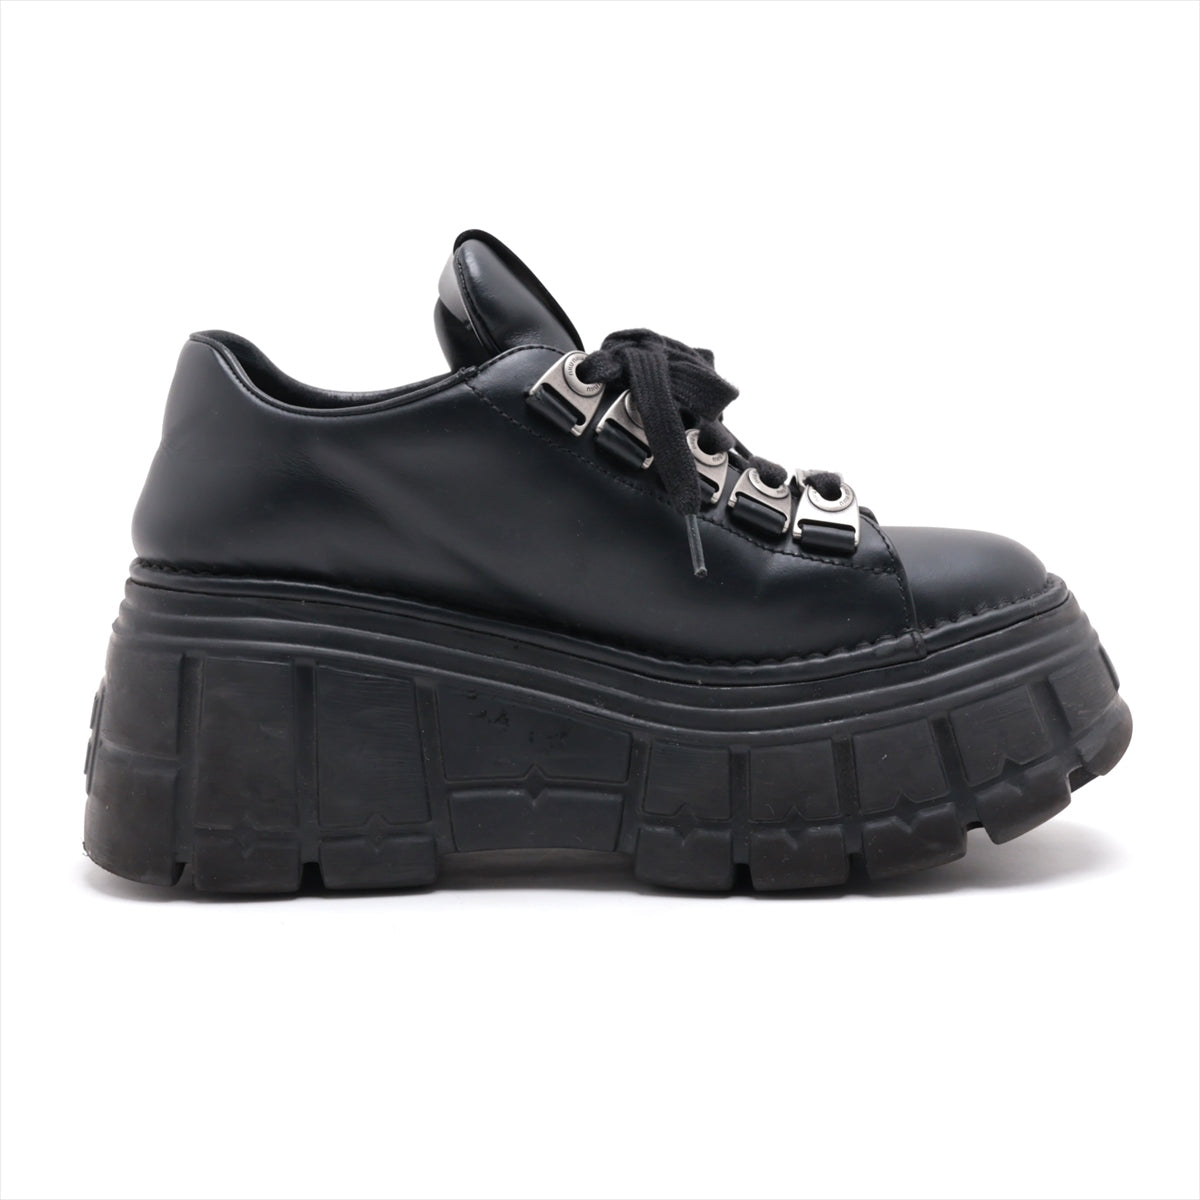 Miu Miu Leather Sneakers 37.5 Ladies' Black 679 Thick bottom lace-up derby